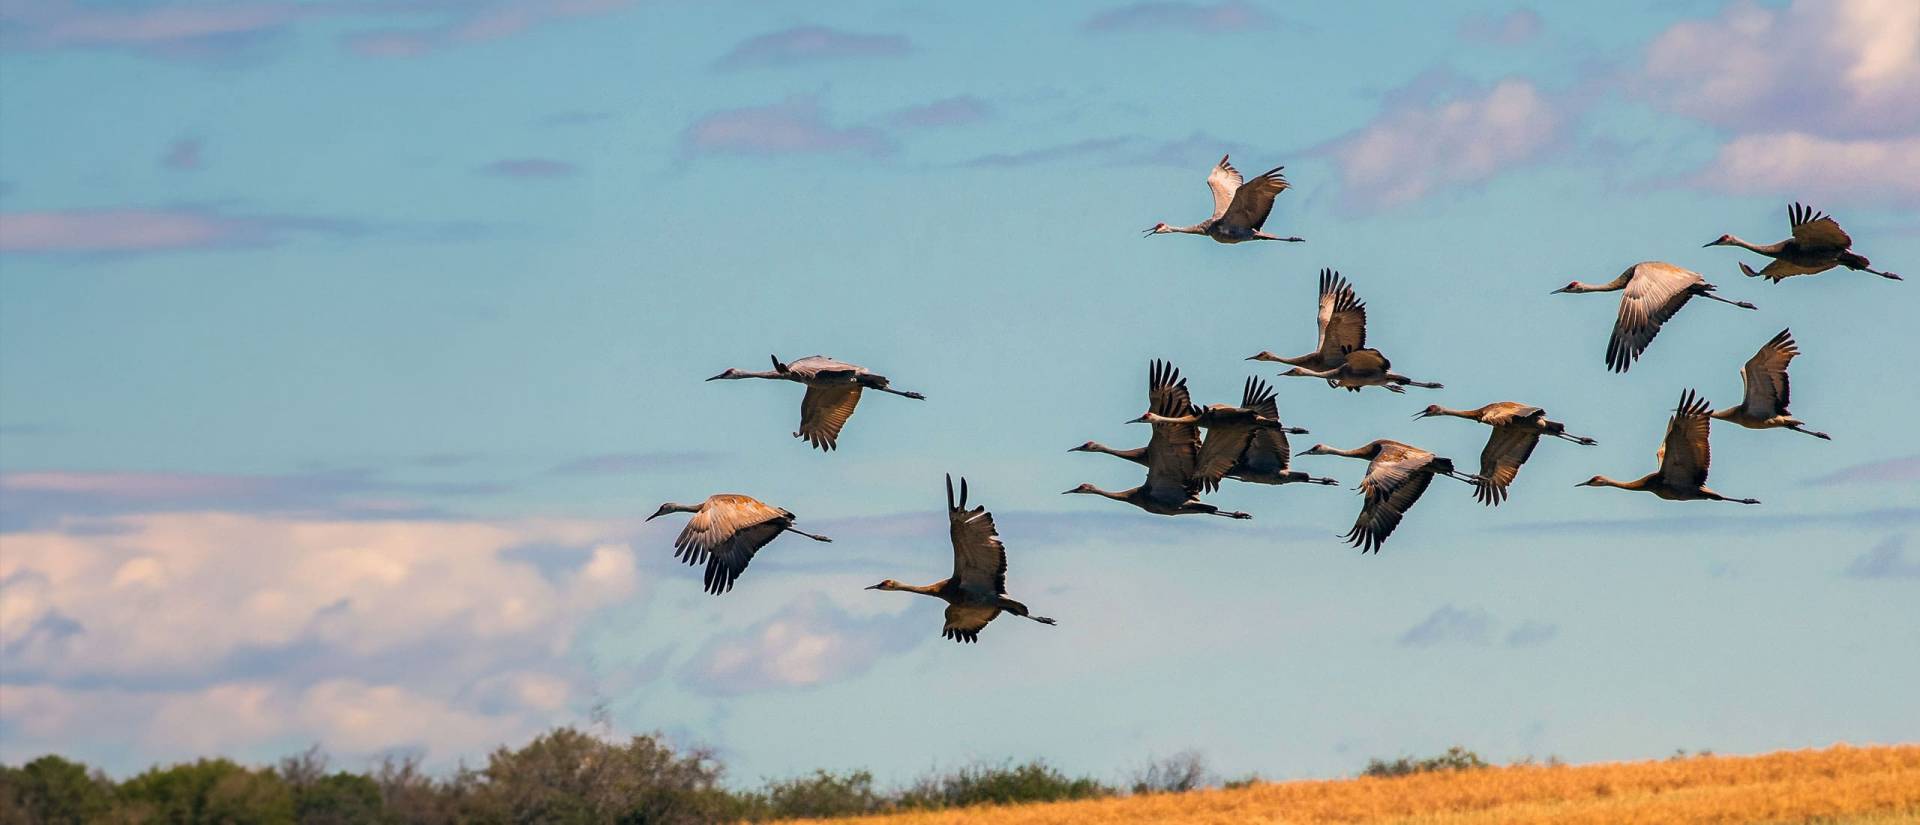 Wings Over Water sandhill cranes flying in a group